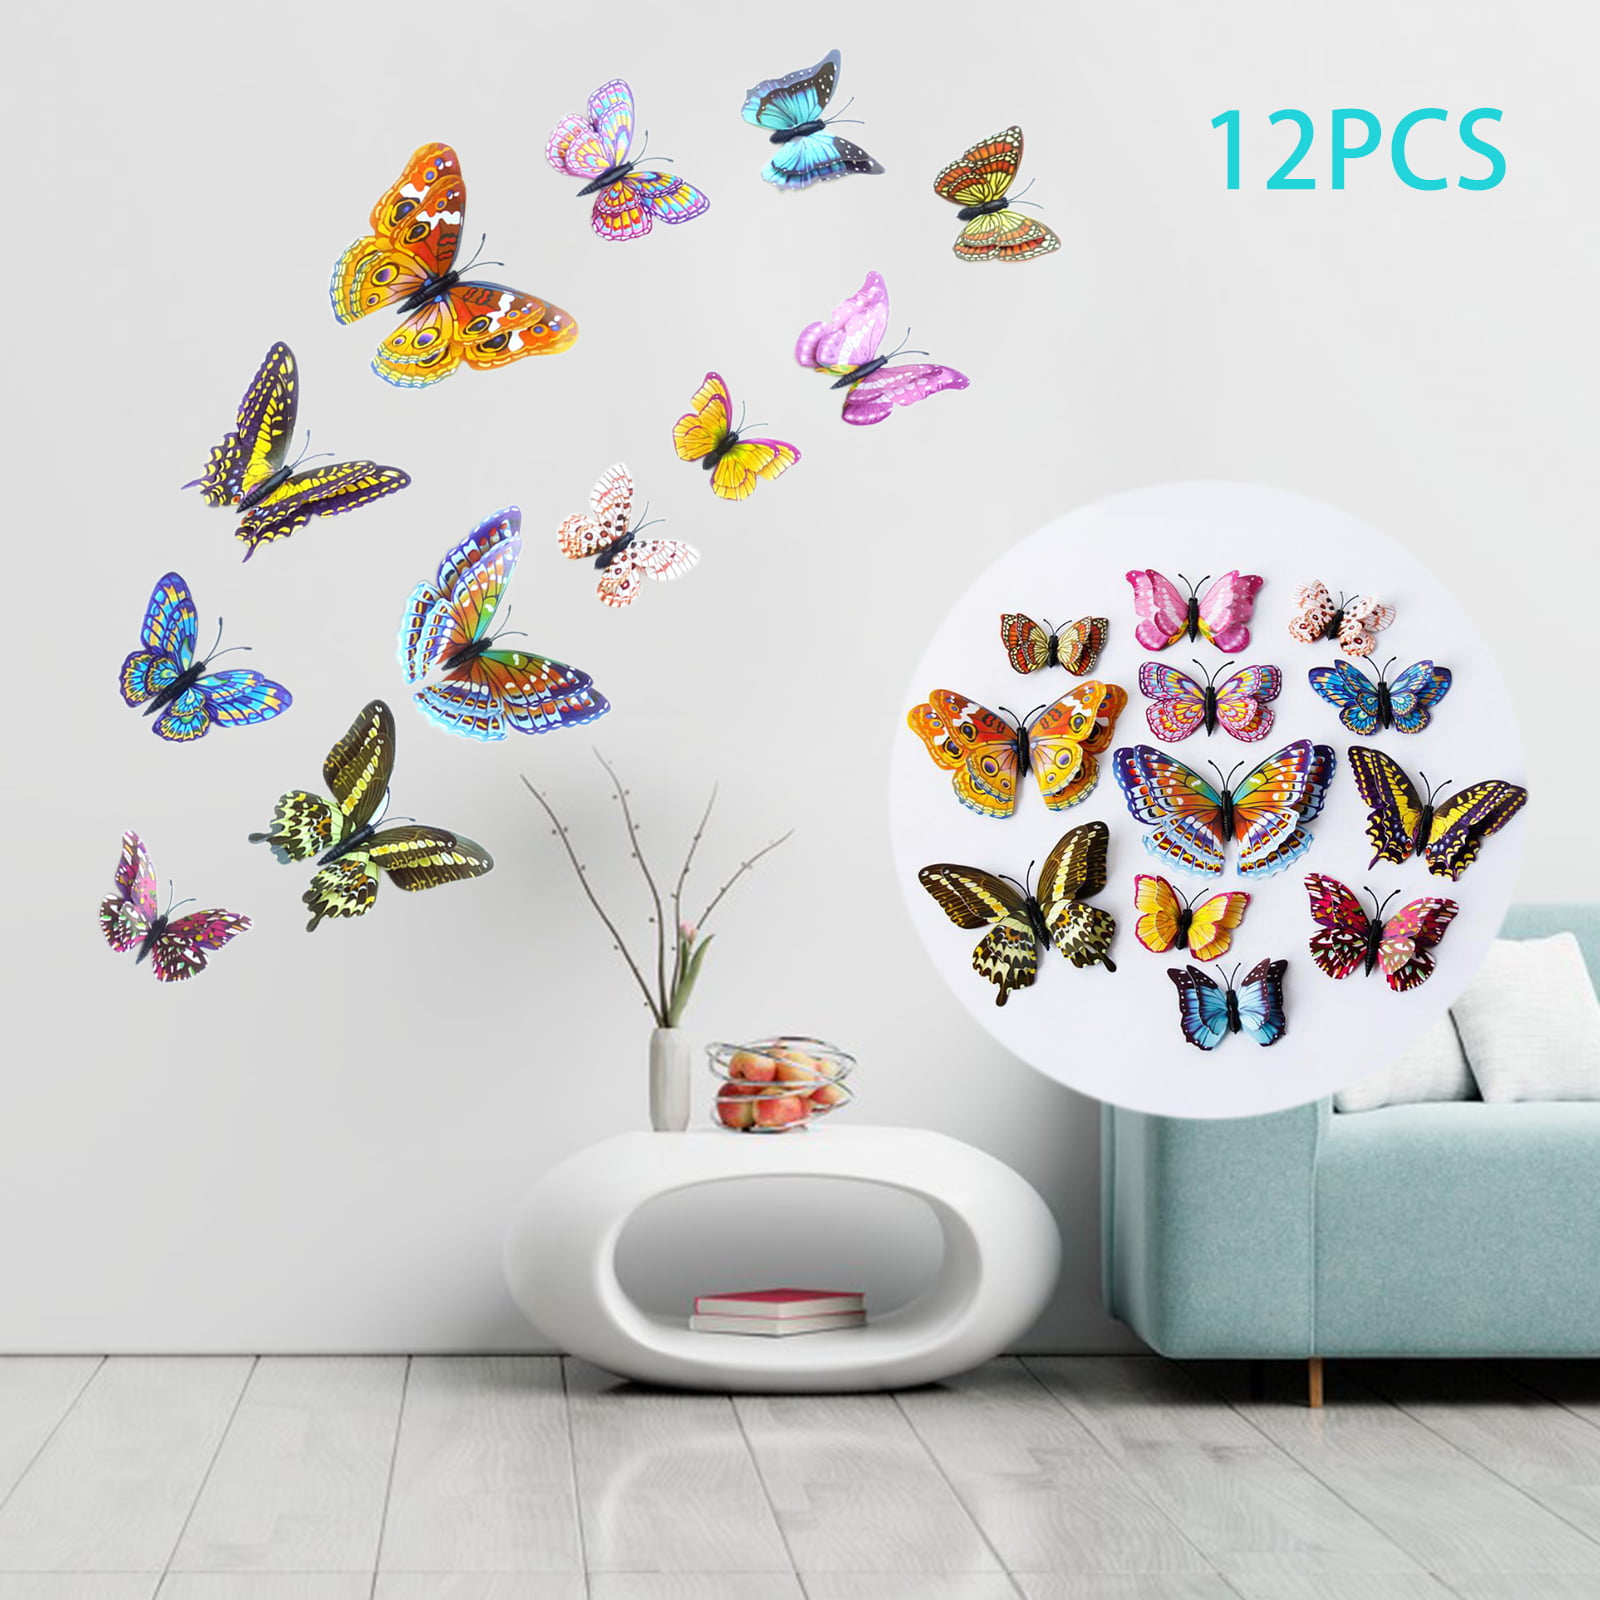 for Home Living Room Kids Bedroom Nursery Art Decor 12pcs 3D Butterfly Wall Stickers Mural Decor Removable Butterfly Wall Decals A Butterfly Wall Decor Stickers 